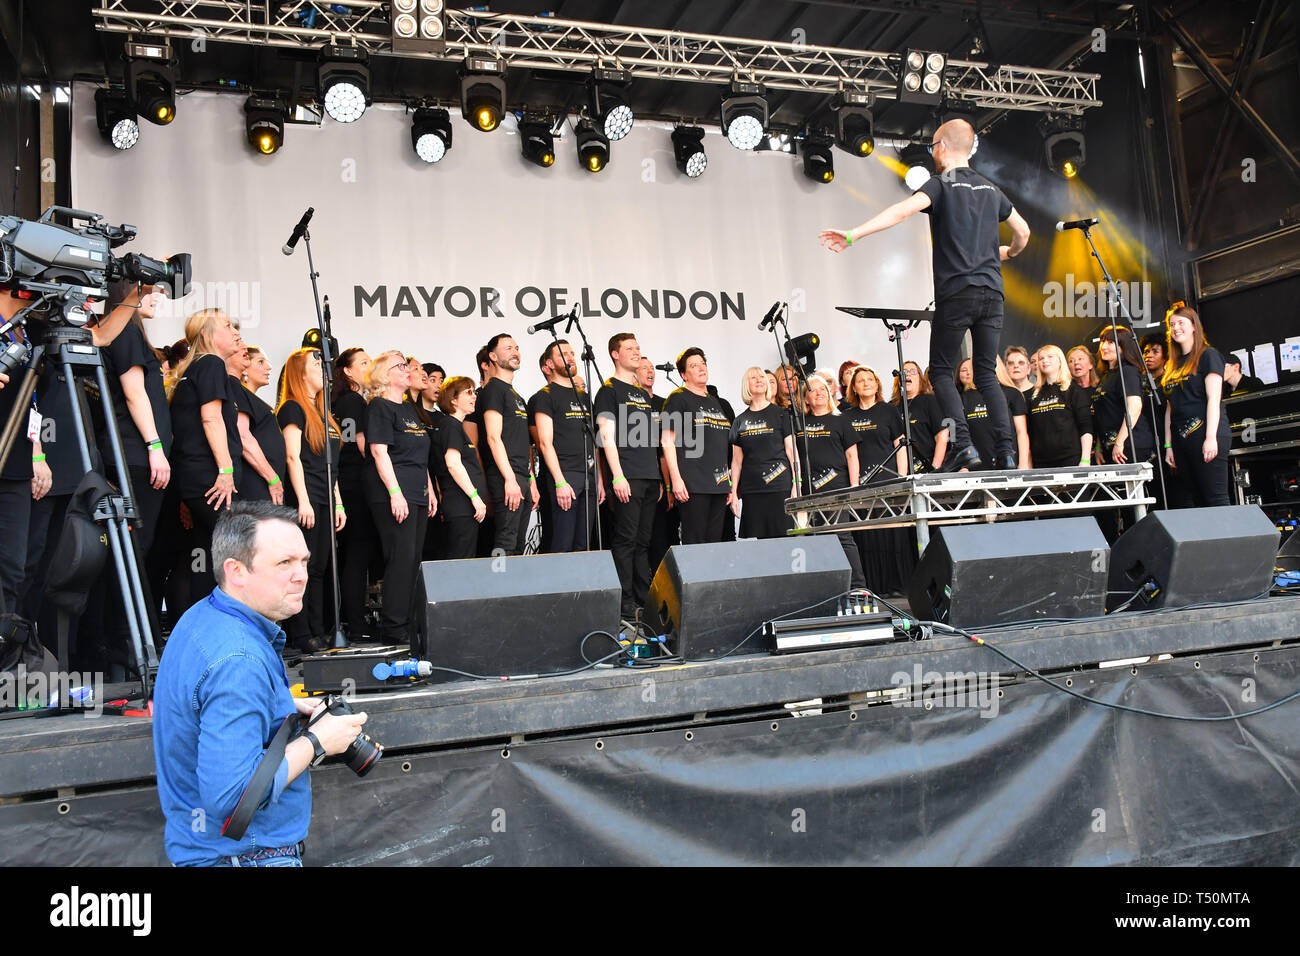 London, UK. 20th April, 2019.Westend Music Choir perfroms at the Feast of St George to celebrate English culture with music and English food stalls in Trafalgar Square on 20 April 2019, London, UK. Credit: Picture Capital/Alamy Live News Stock Photo